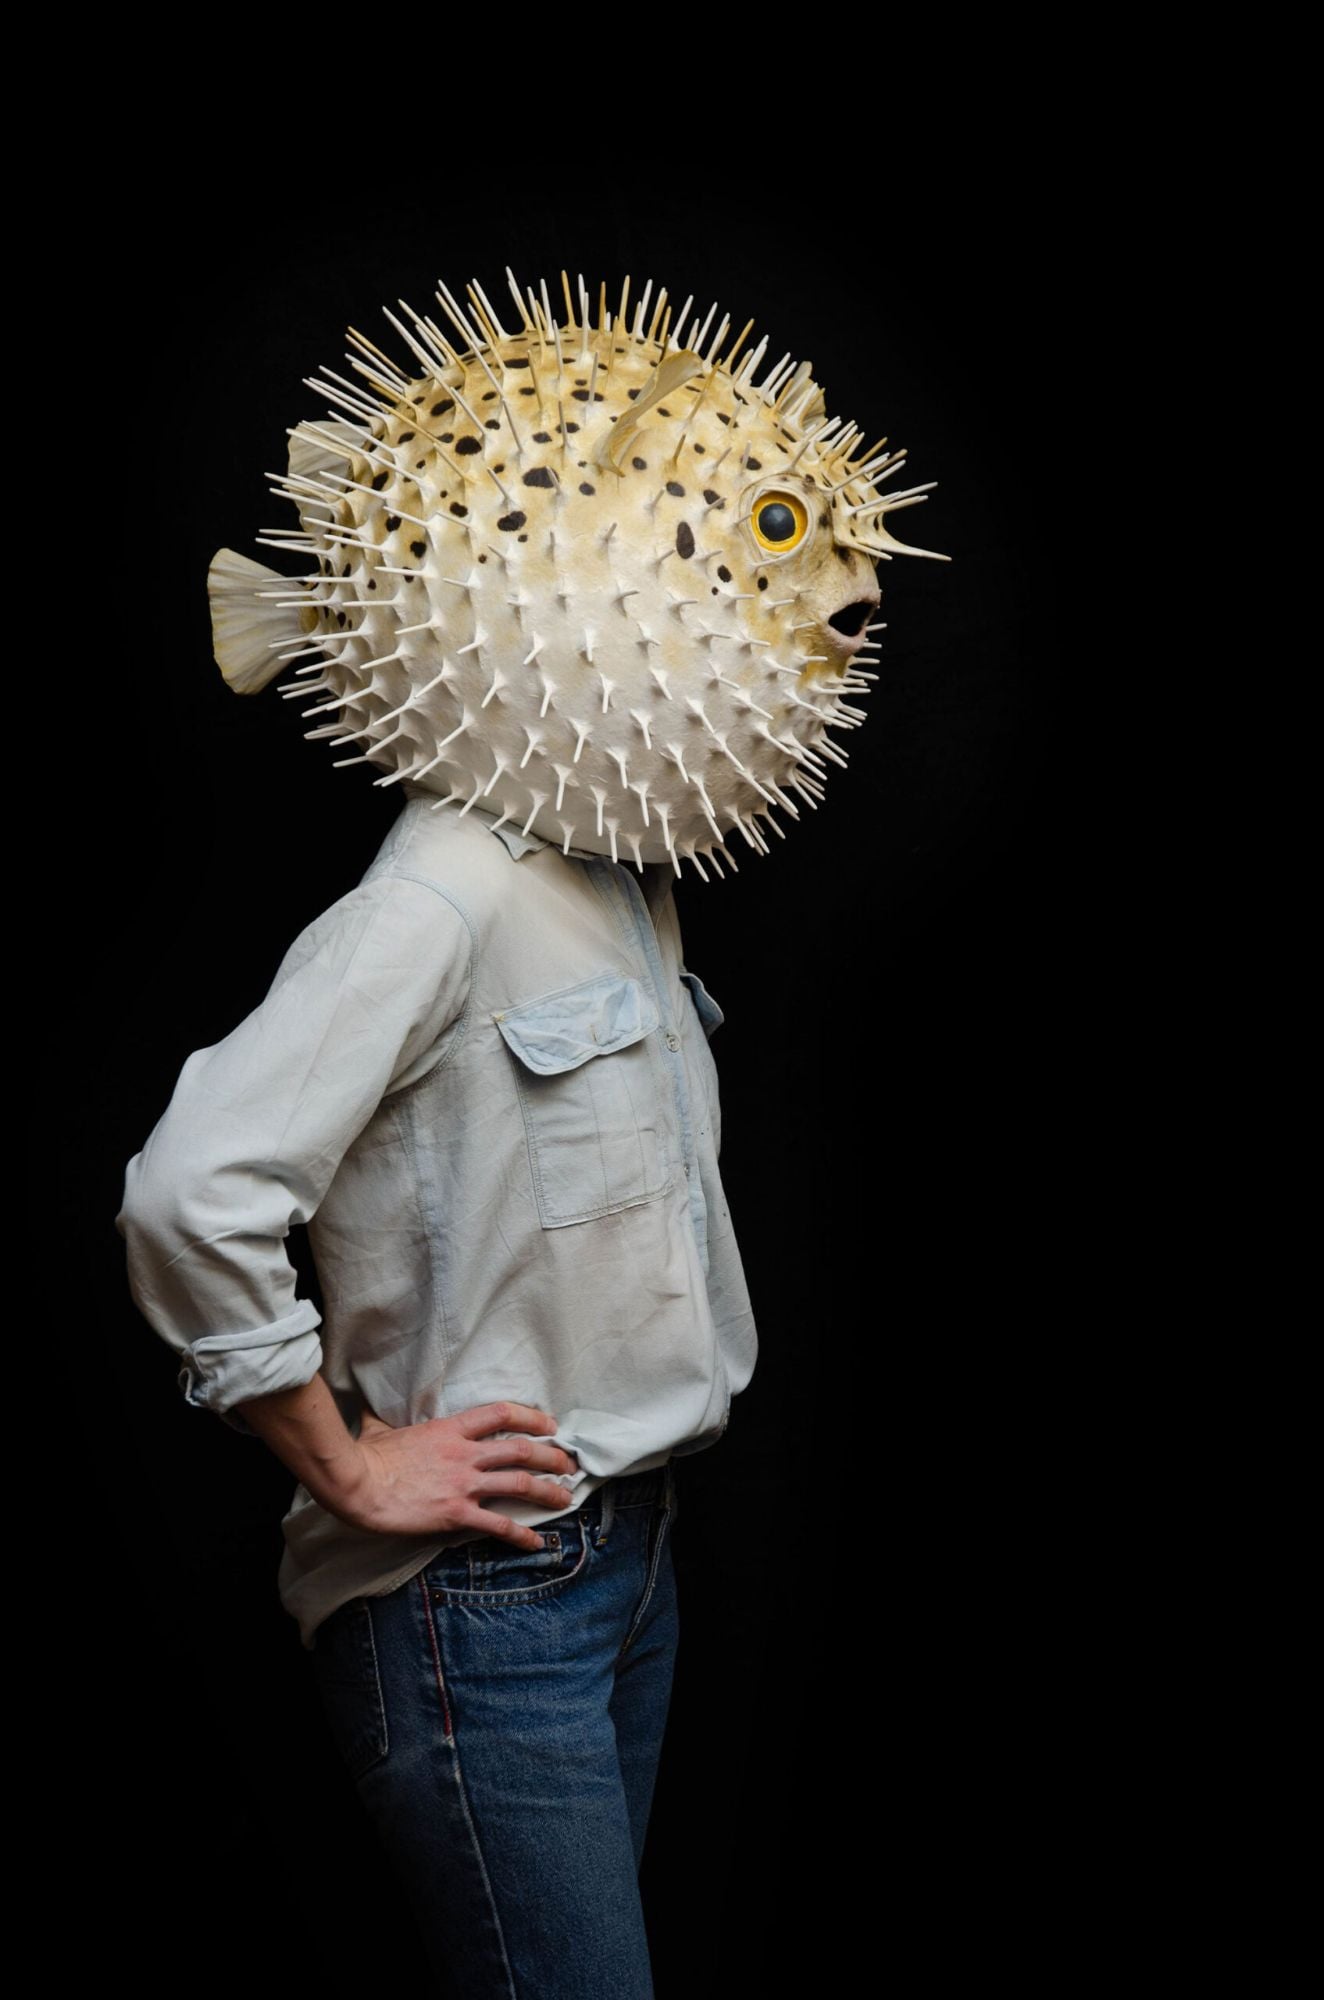 A bizarre Puffer Fish Face Mask featured in the Vicki Myhren Gallery's new 